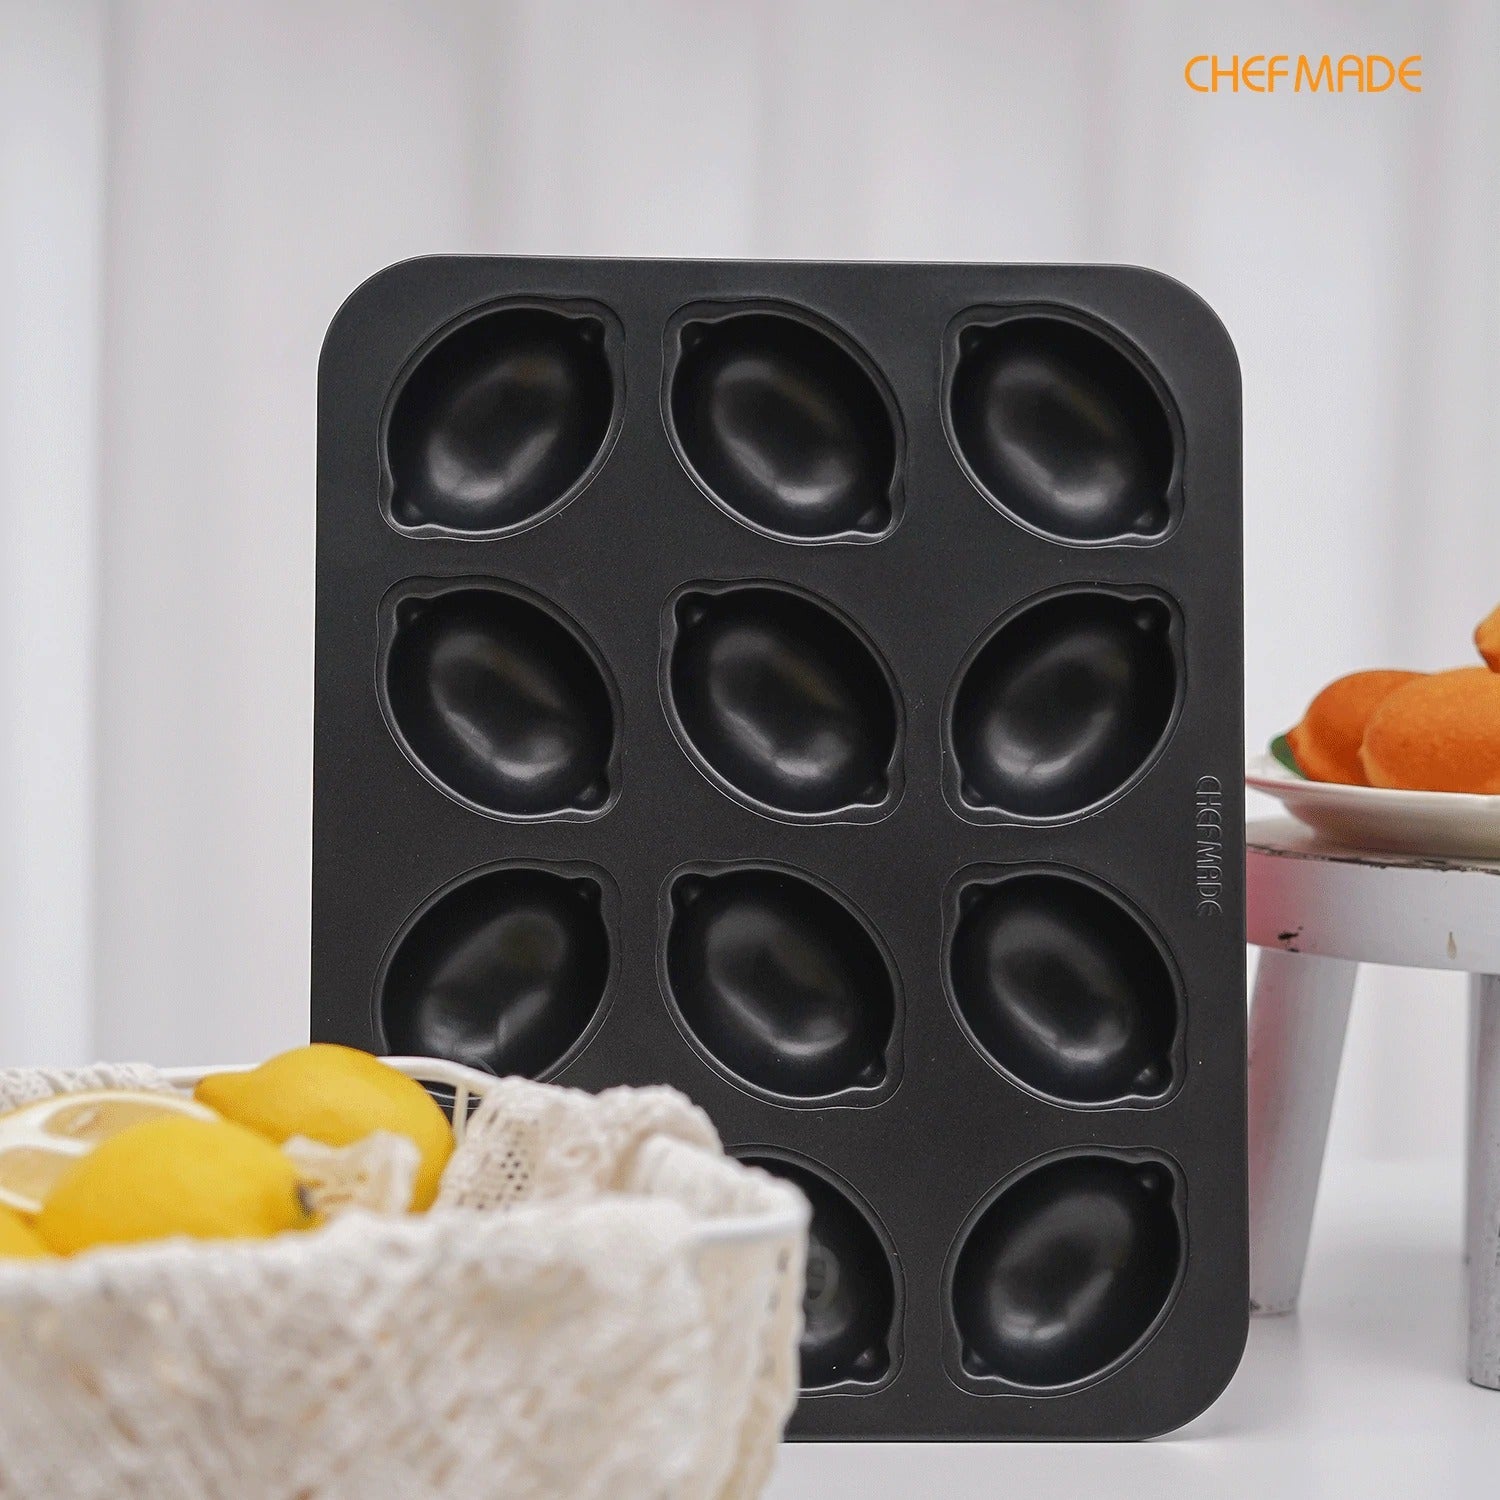 CHEFMADE 12 Cup Non-Stick Lemon Cake Mould (WK9871)